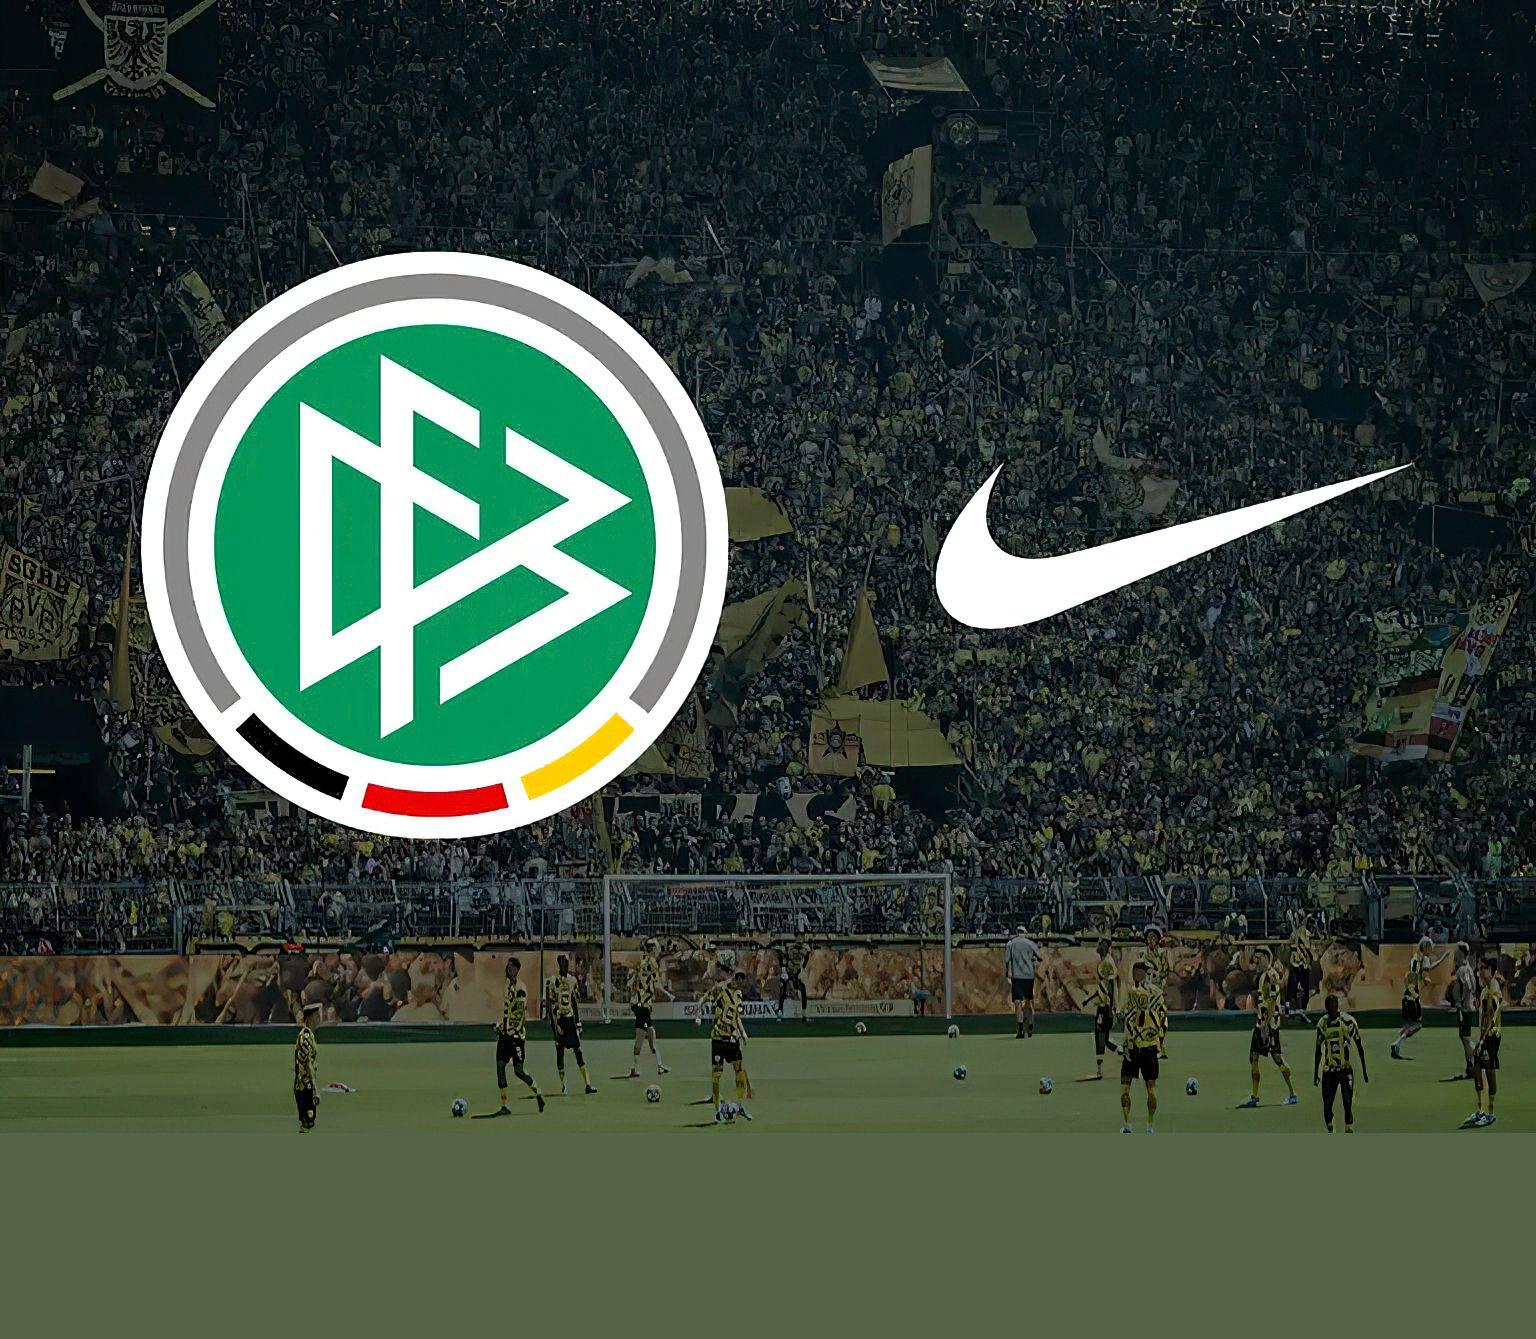 A change of era: Nike becomes the new sponsor of the German national football team